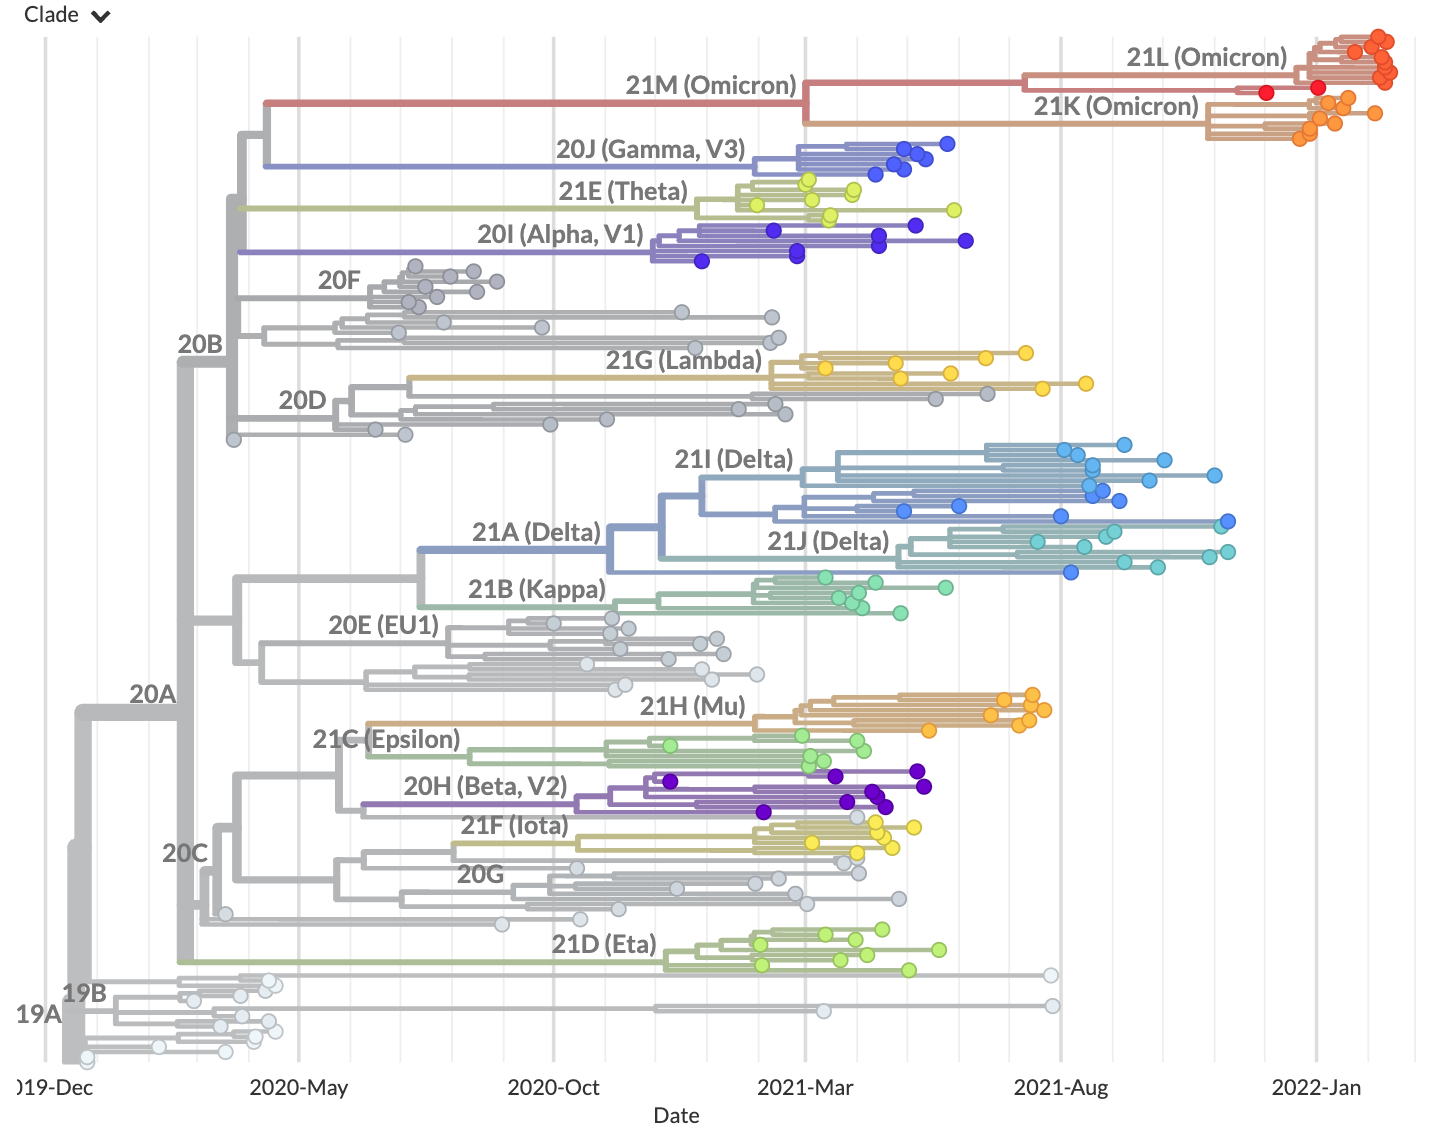 Phylogenetic tree from the "example data" tutorial as visualized in Auspice